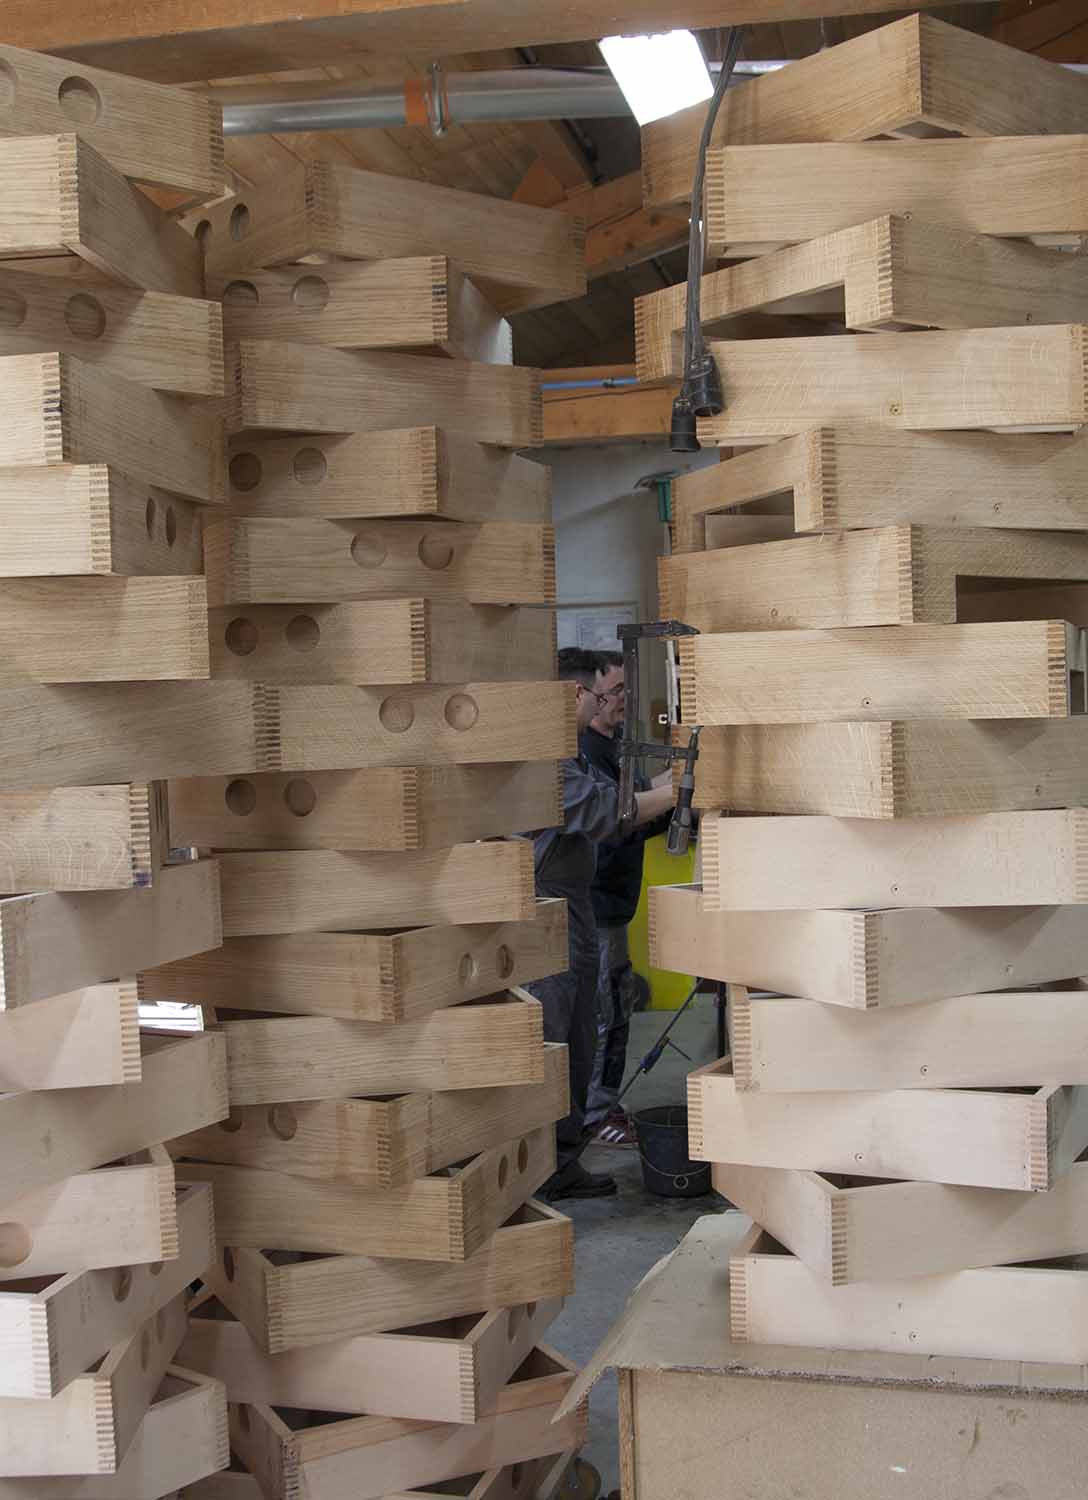 QUISO KEZA cheese trolley shelves stacked in Patrick Sarran's workshop